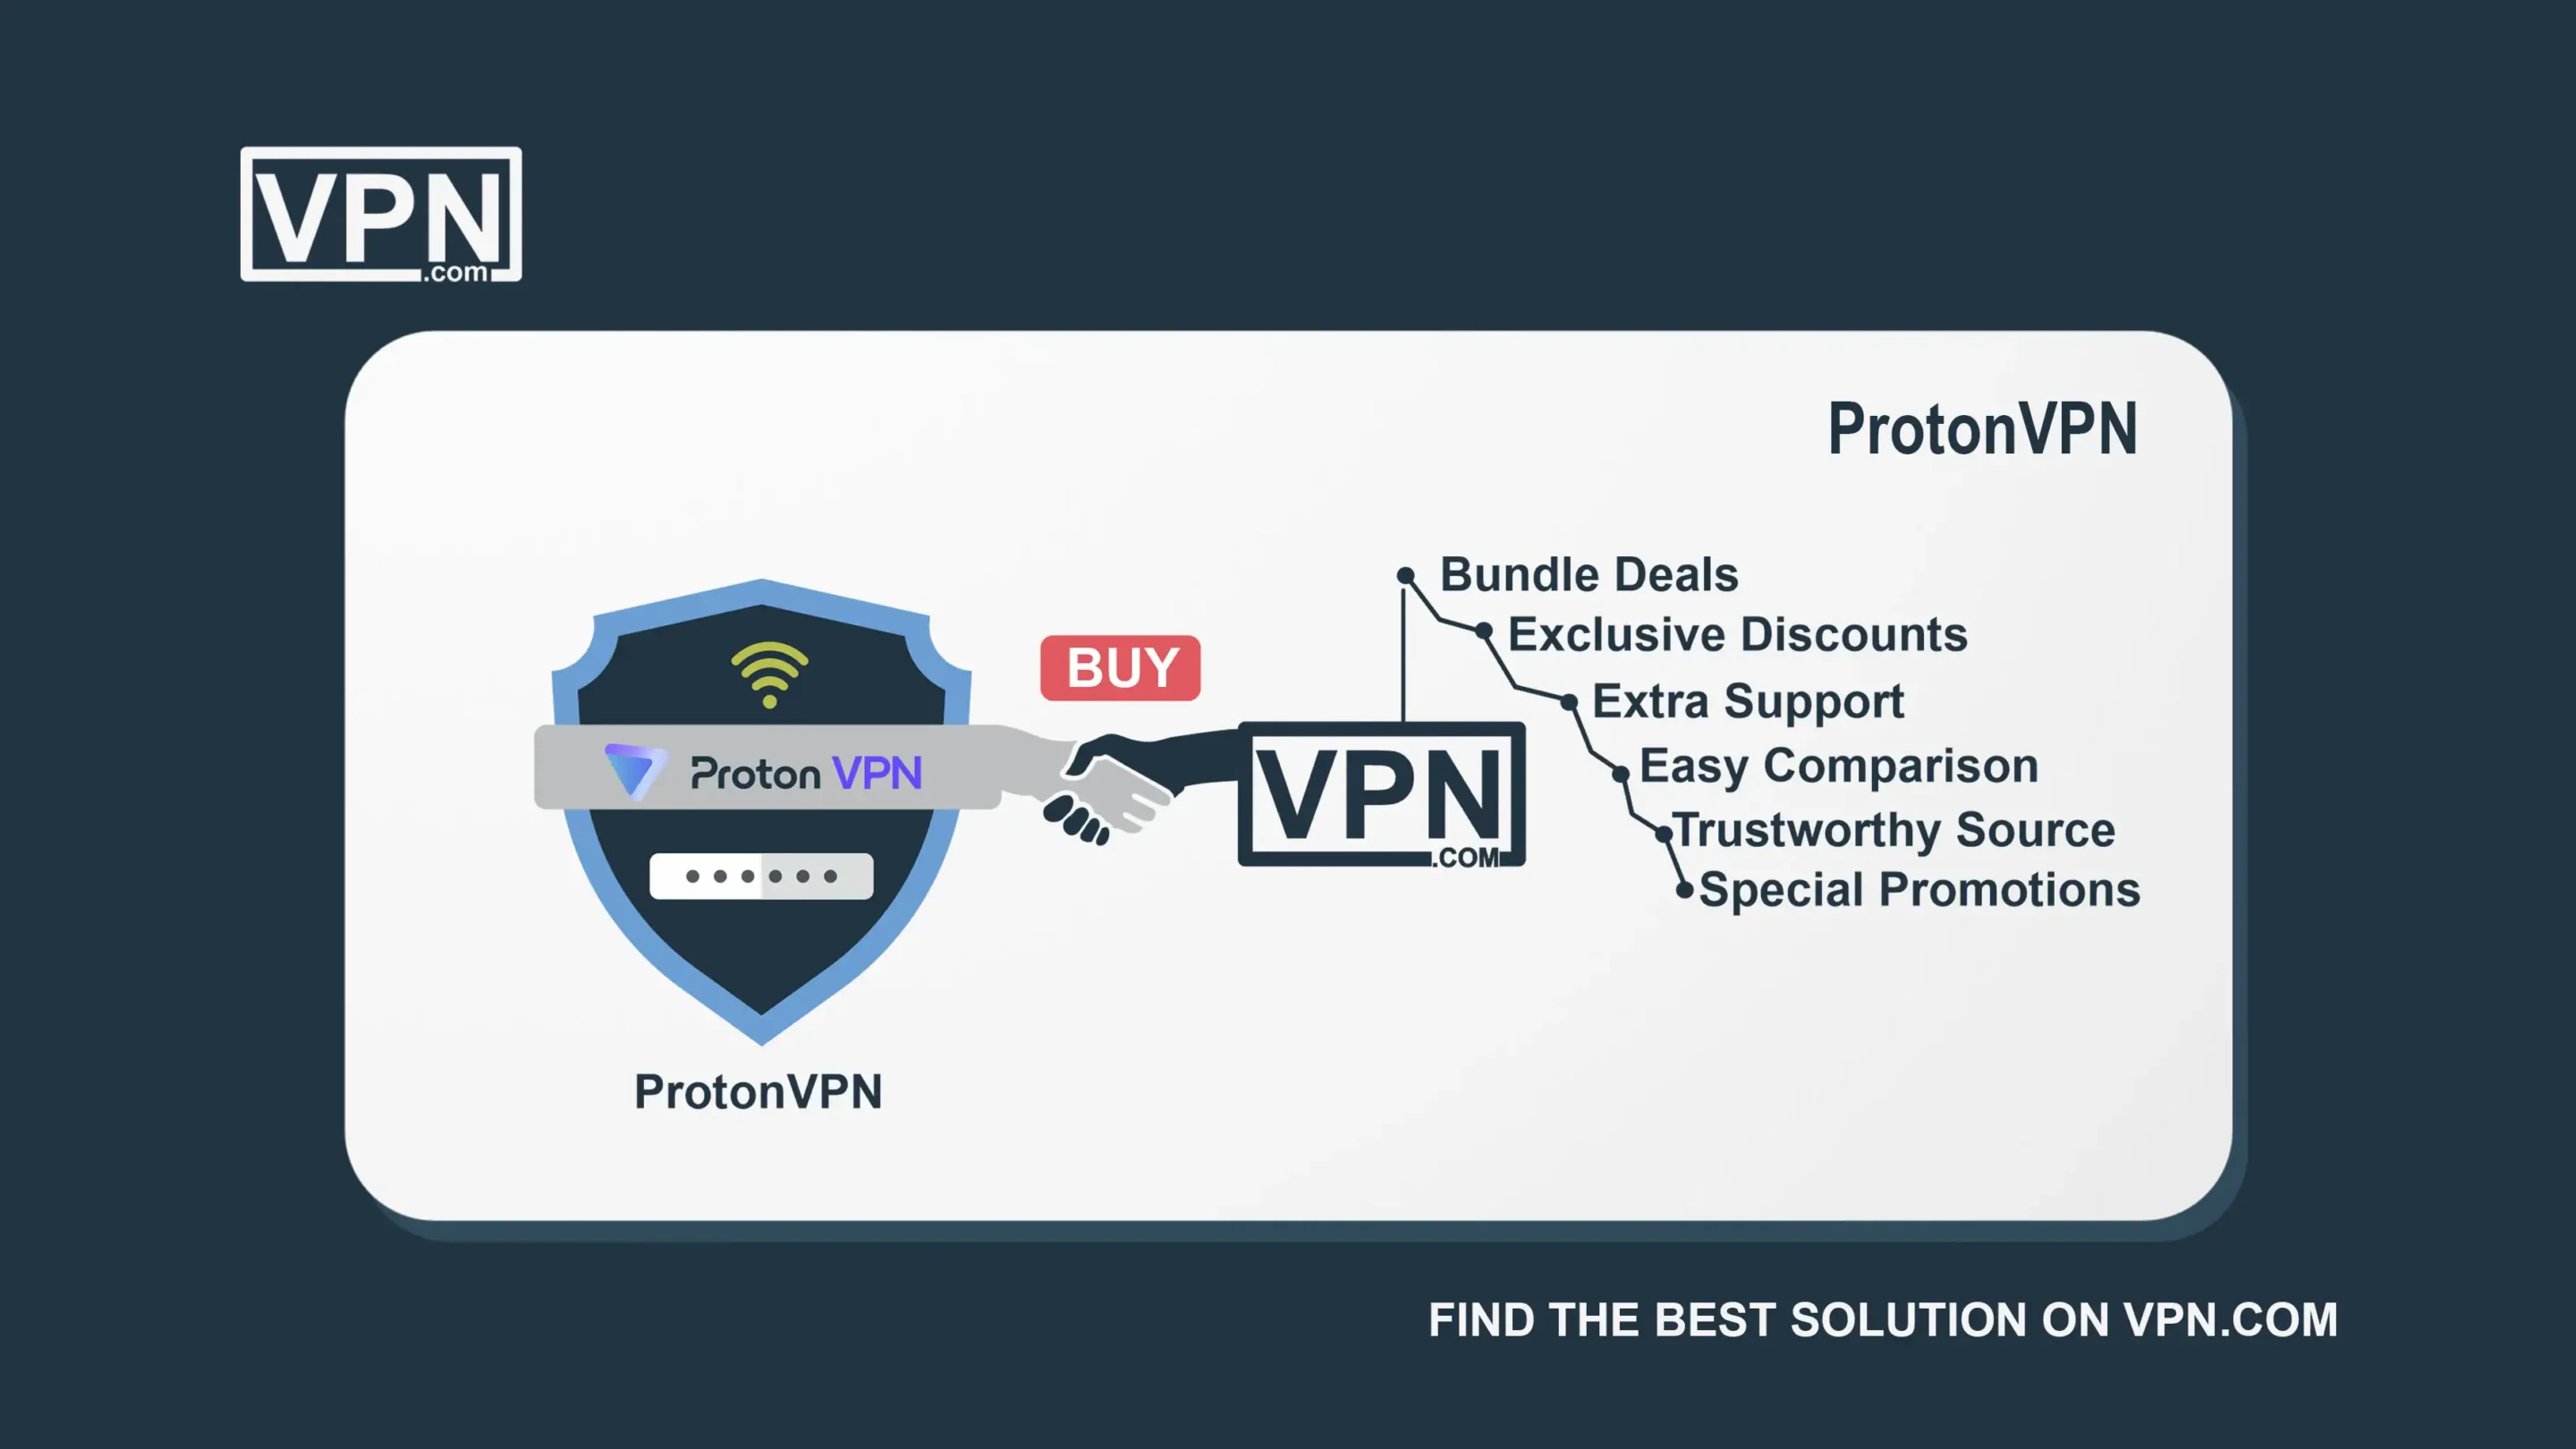 Why Should We Buy ProtonVPN from VPN com